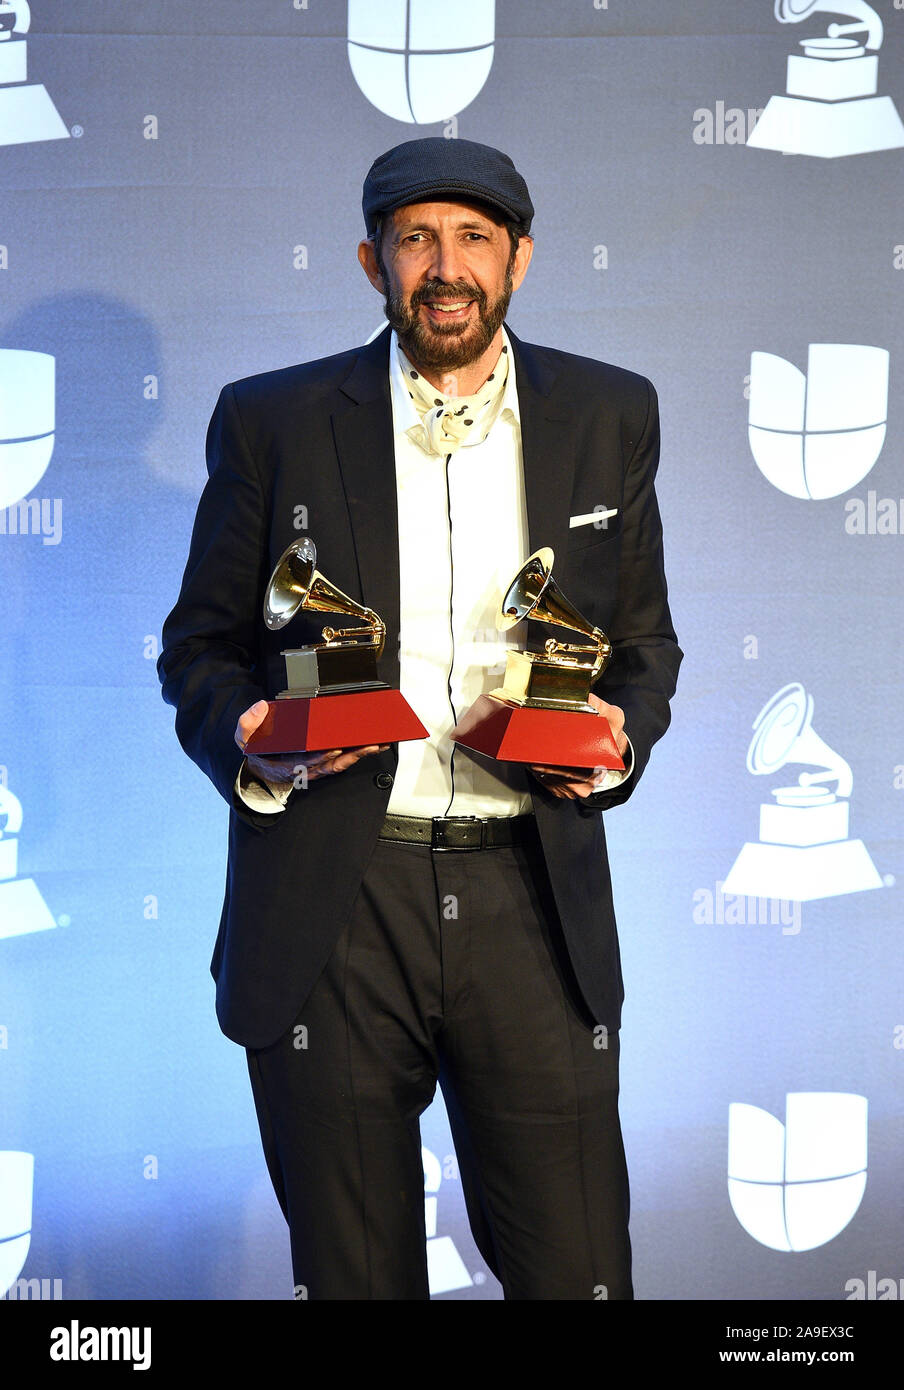 Las Vegas, USA . 14th Nov, 2019. Juan Luis Guerra poses with the awards for 'Best Contemporary Tropical Fusion Album' and 'Best Tropical Song' in the press room during the 20th annual Latin GRAMMY Awards at MGM Grand Garden Arena on November 14, 2019 in Las Vegas, Nevada. Photo: imageSPACE/MediaPunch/Alamy Live News  Stock Photo